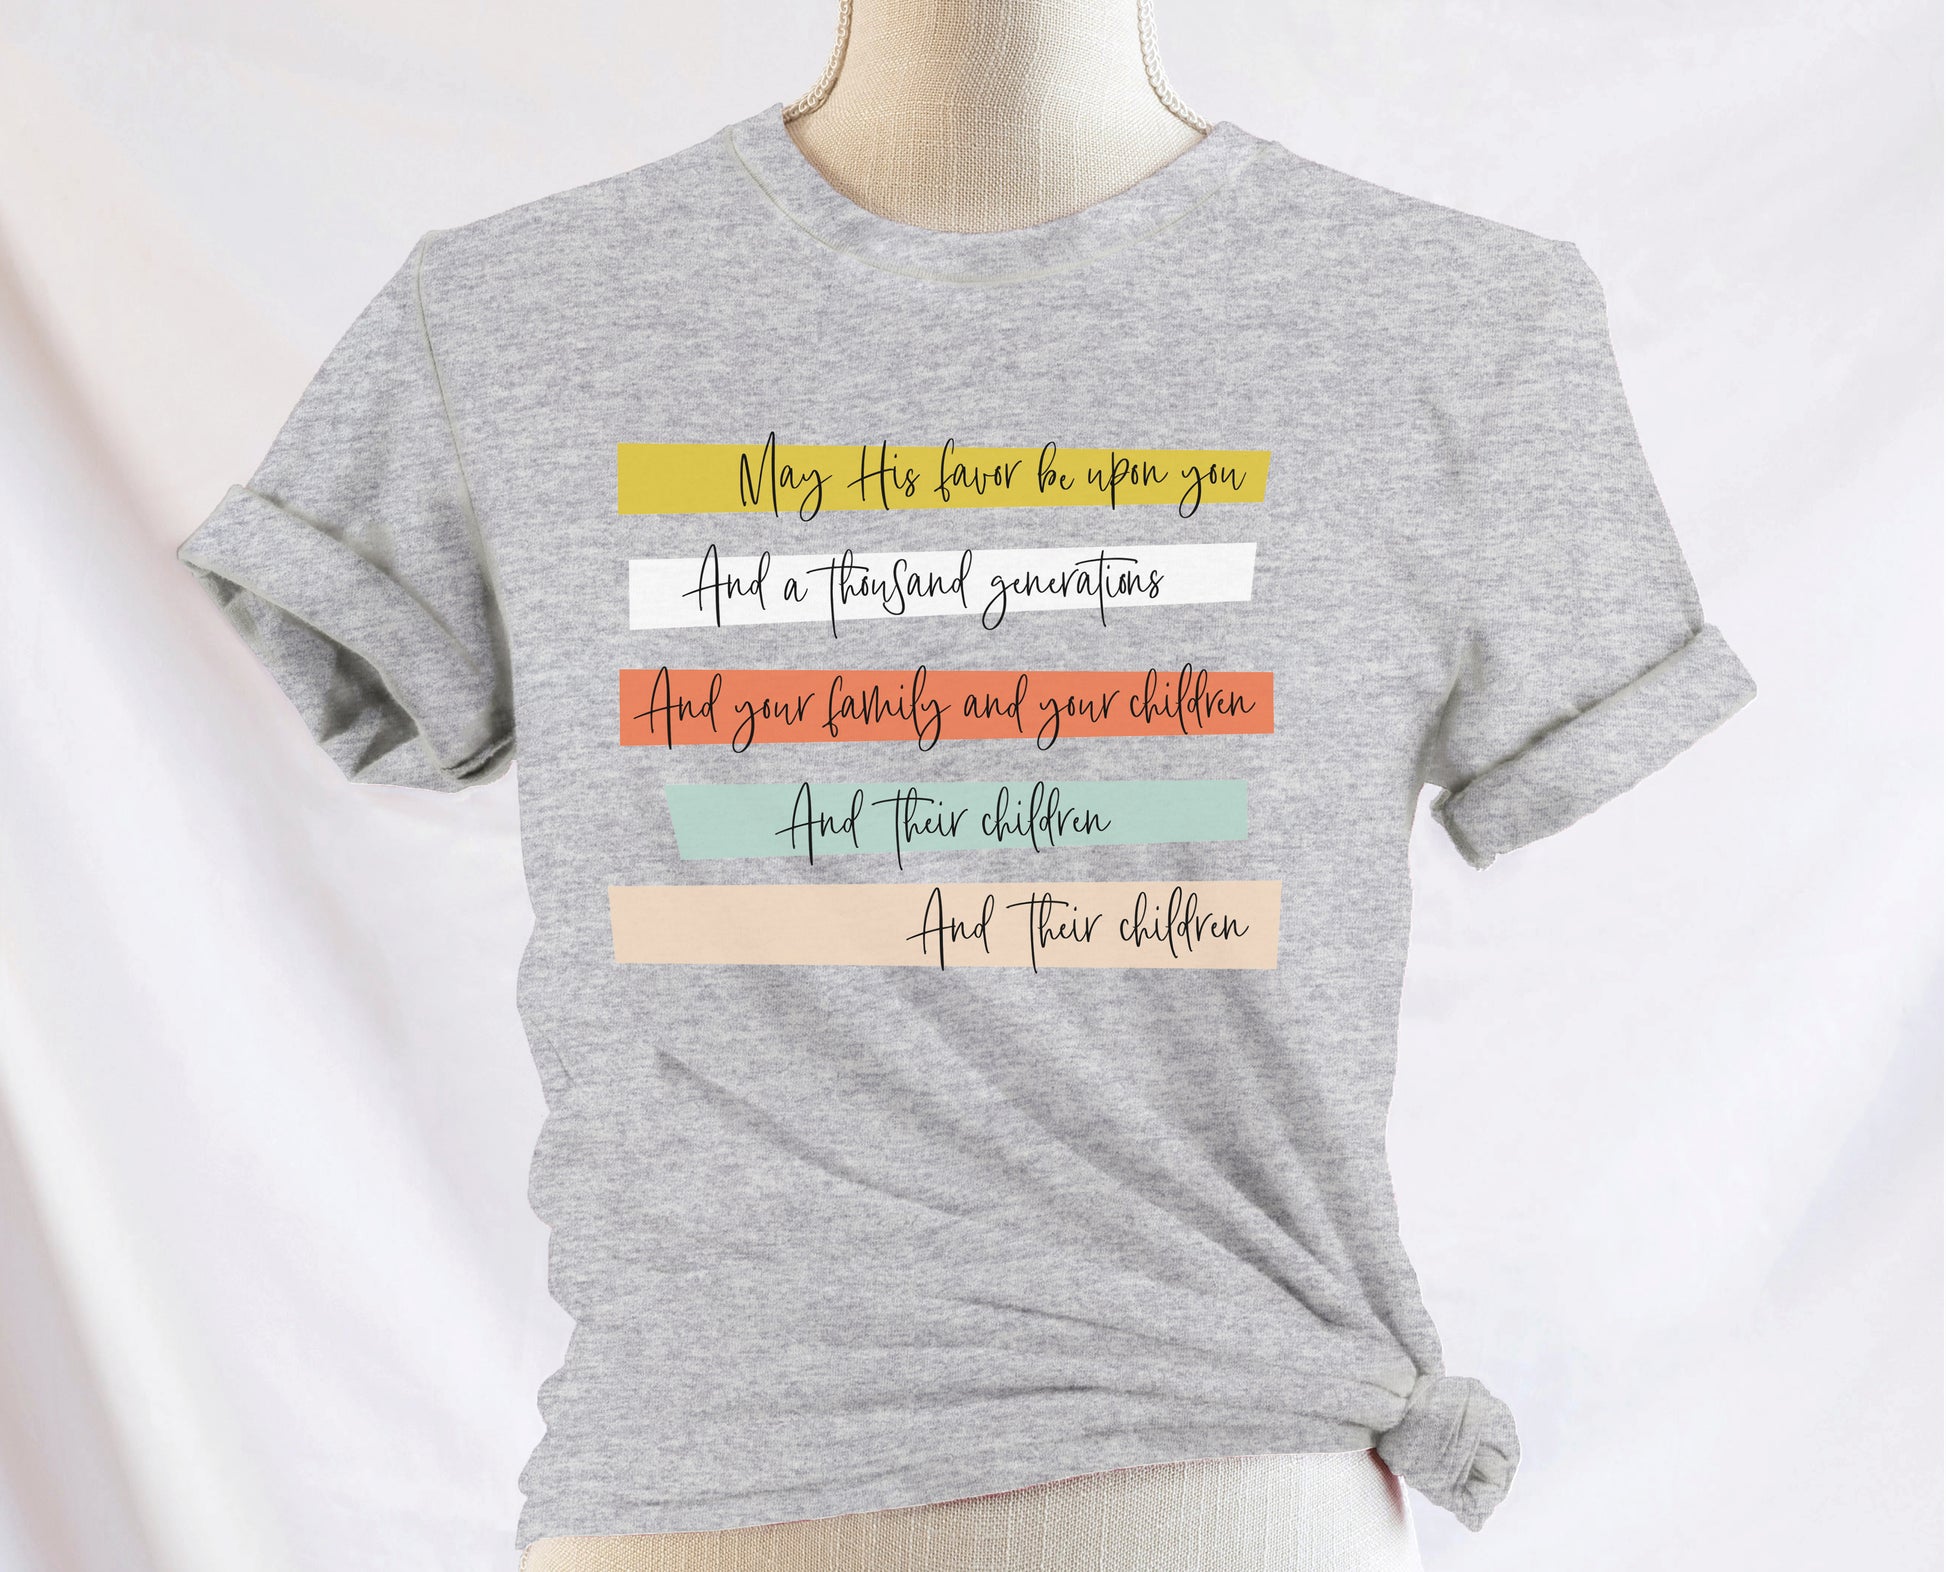 May His Favor Be Upon You and a thousand generations The Family and children Blessing Christian aesthetic 5 bars design printed on soft heather gray t-shirt for women